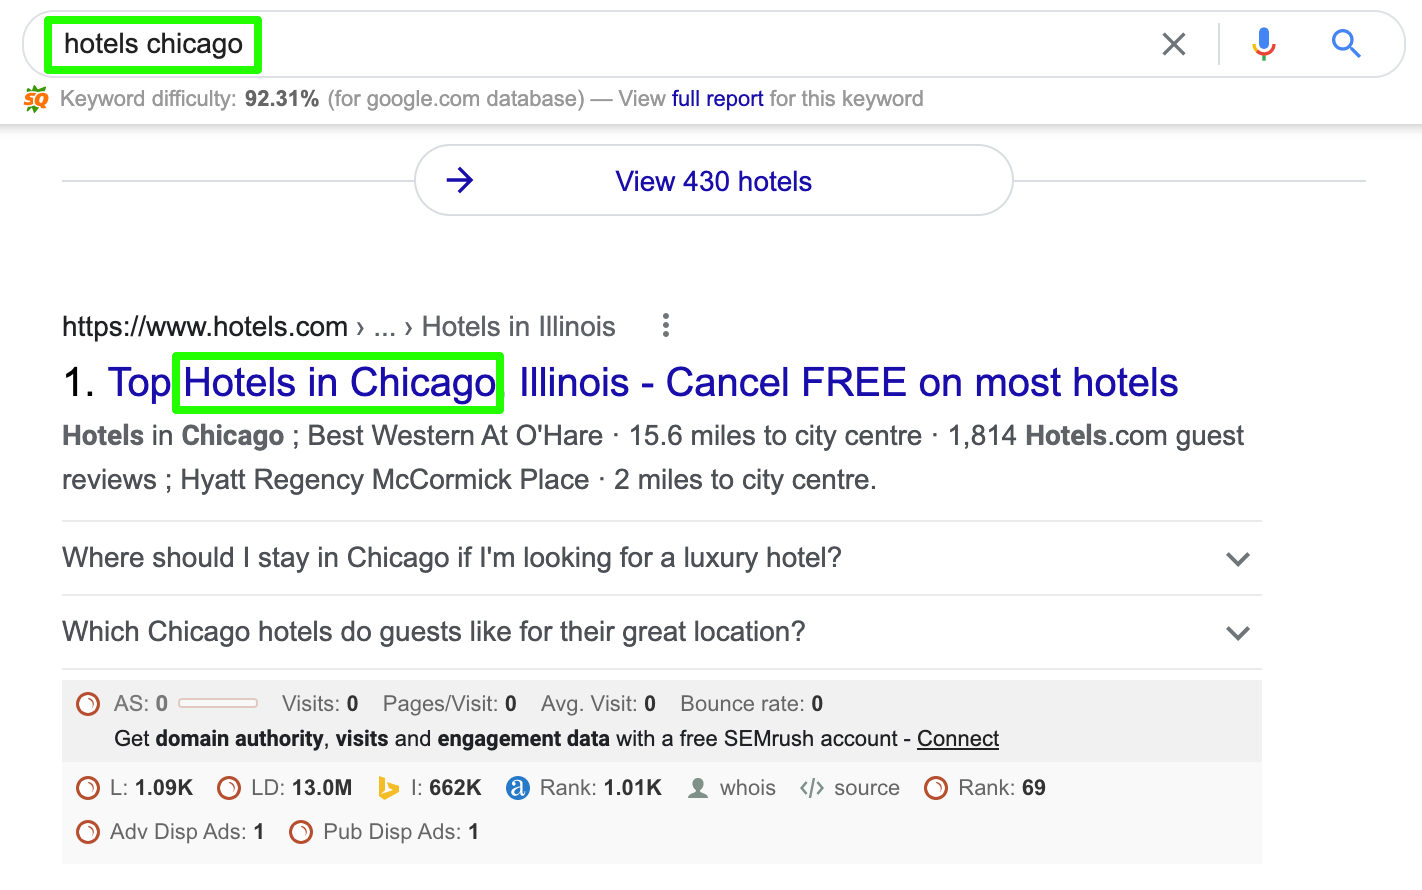 results for "hotels chicago"